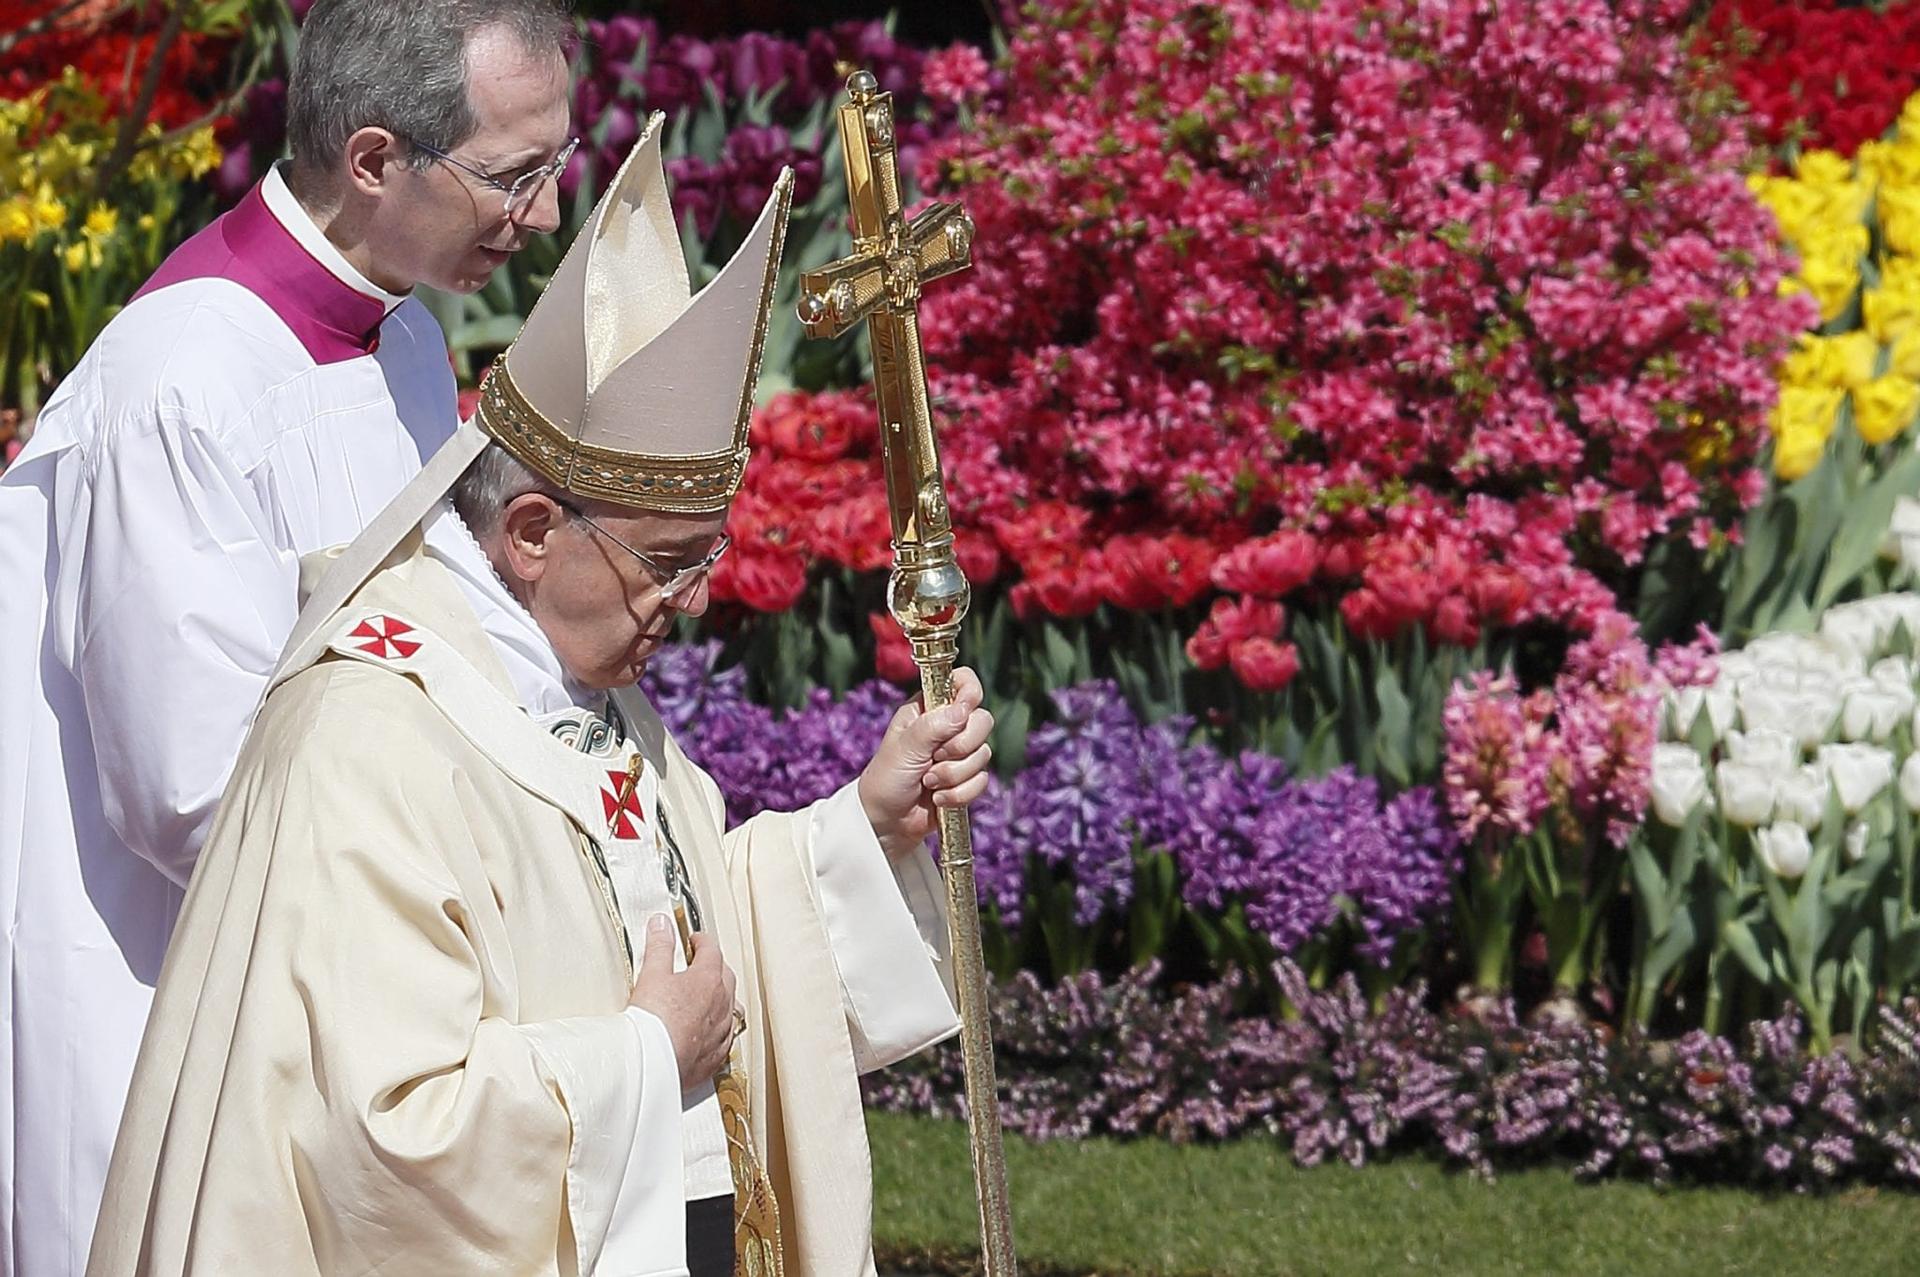 Faith and flowers: Special rules keep God’s house simply beautiful